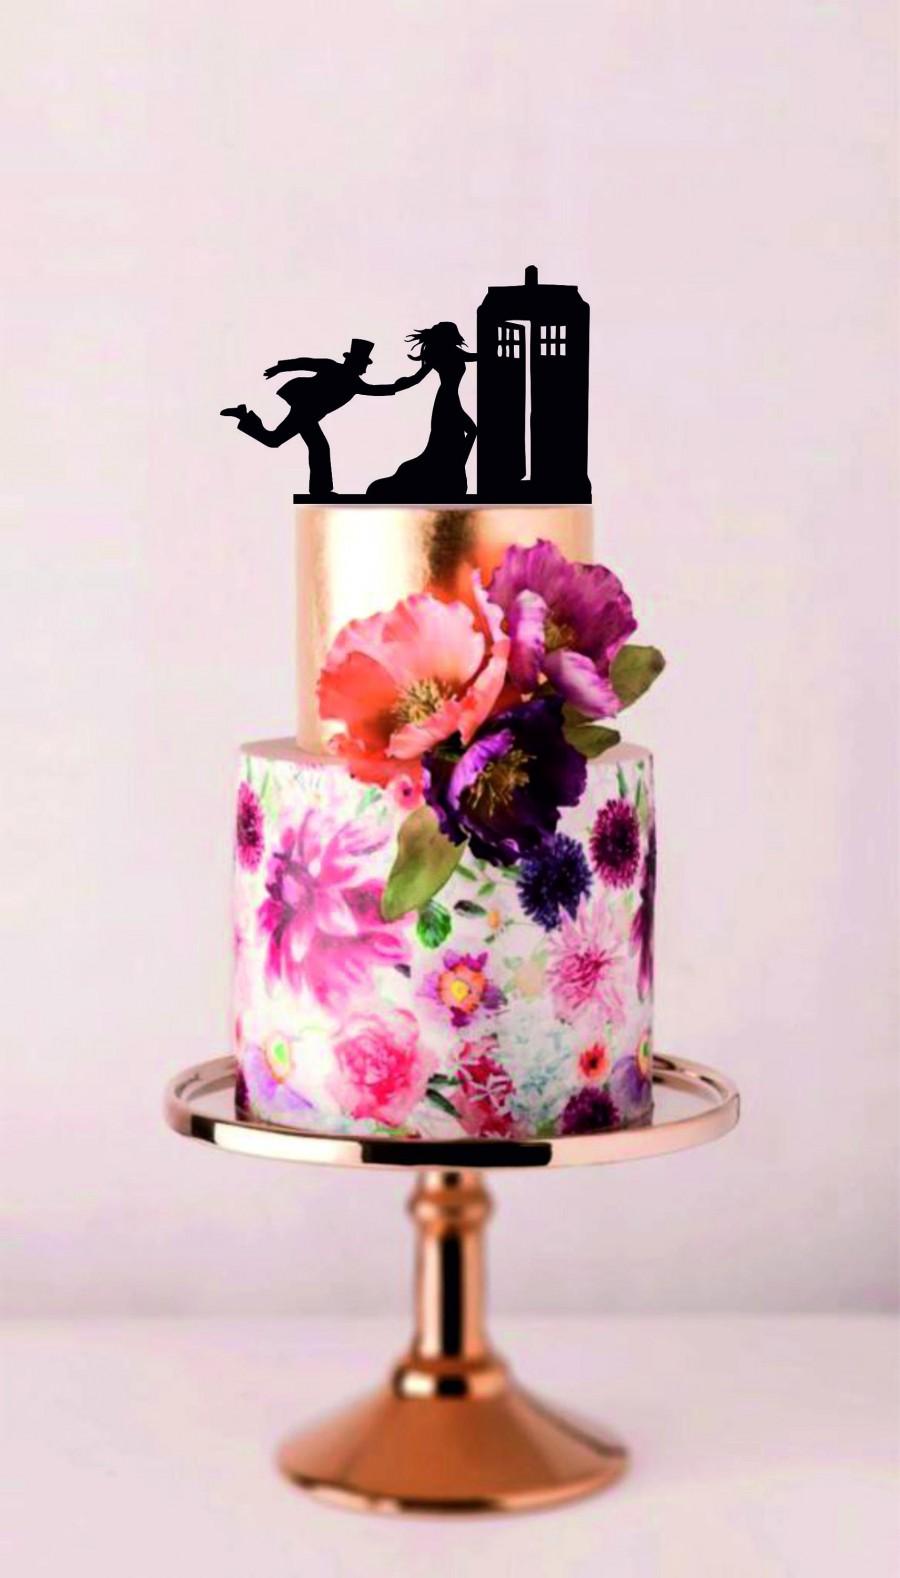 Wedding - Running to the Police Call Box Wedding Cake Topper, Police Call Box Cake Topper, Fairy Tail Topper, Couple topper